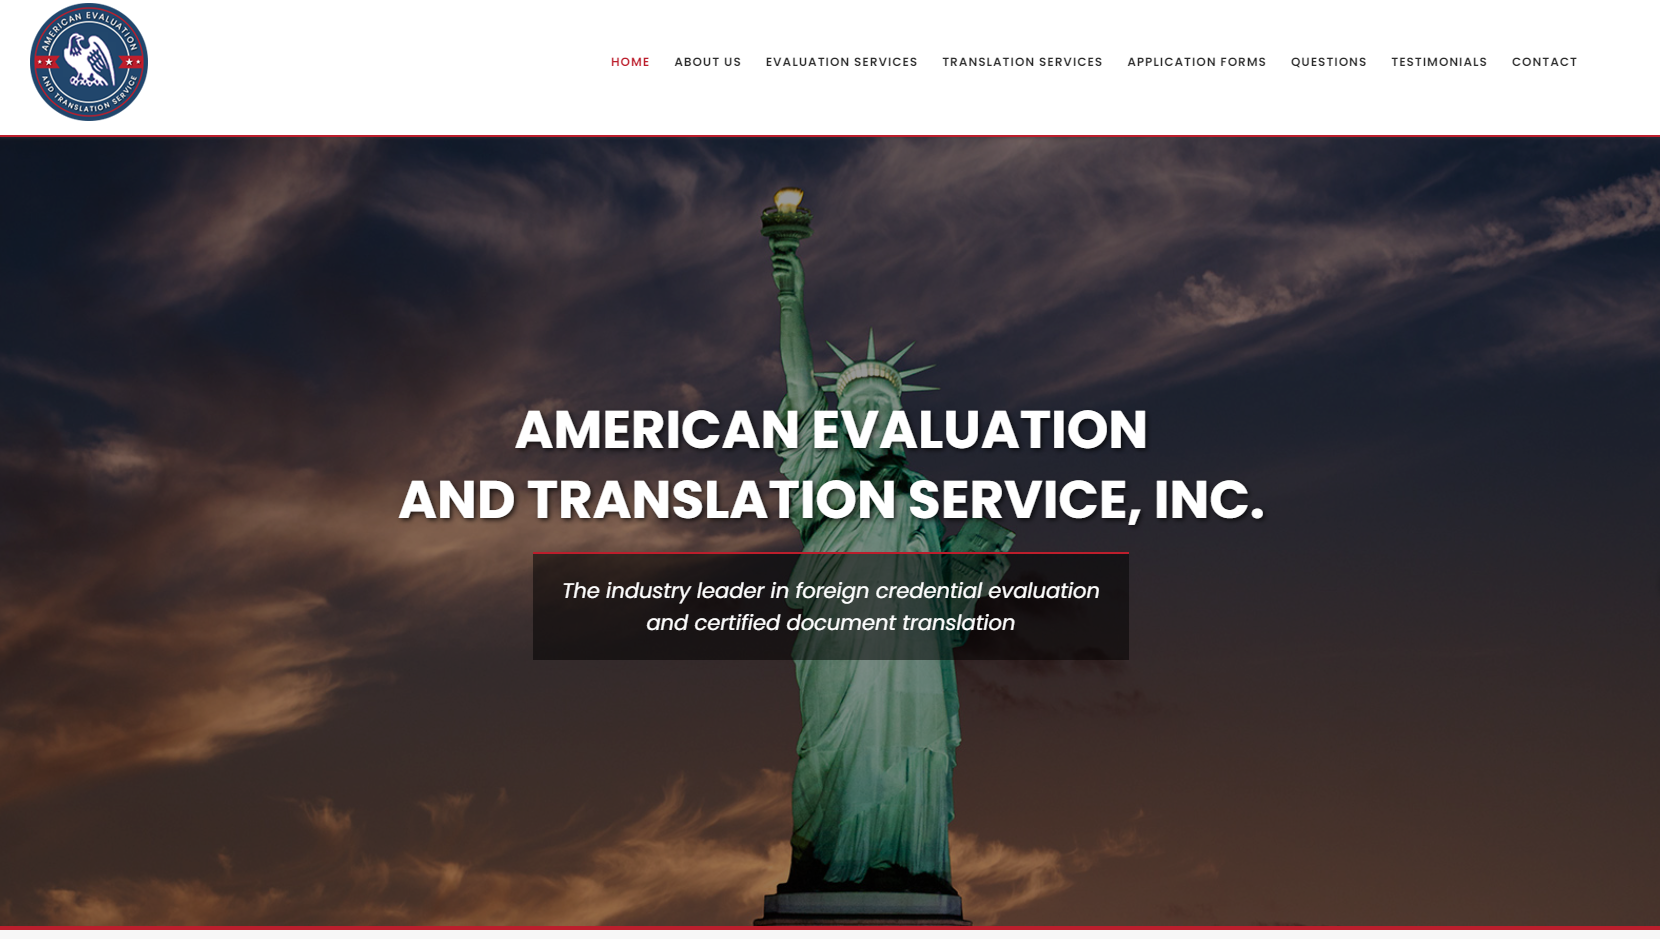 American Evaluation and Translation Service (AETS)